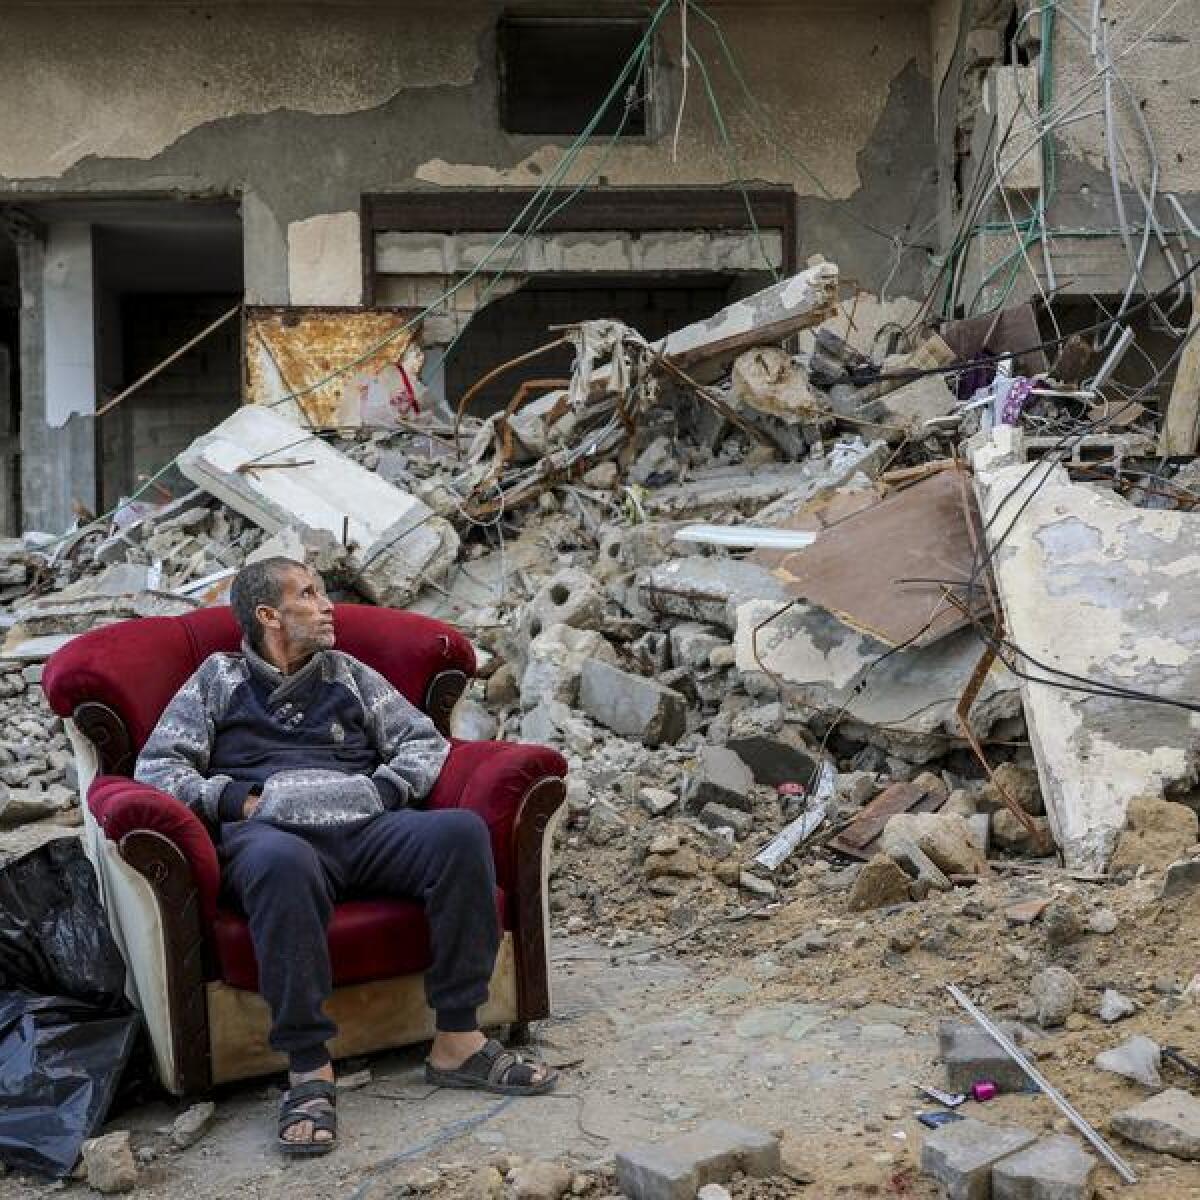 A Palestinian man sits in an armchair